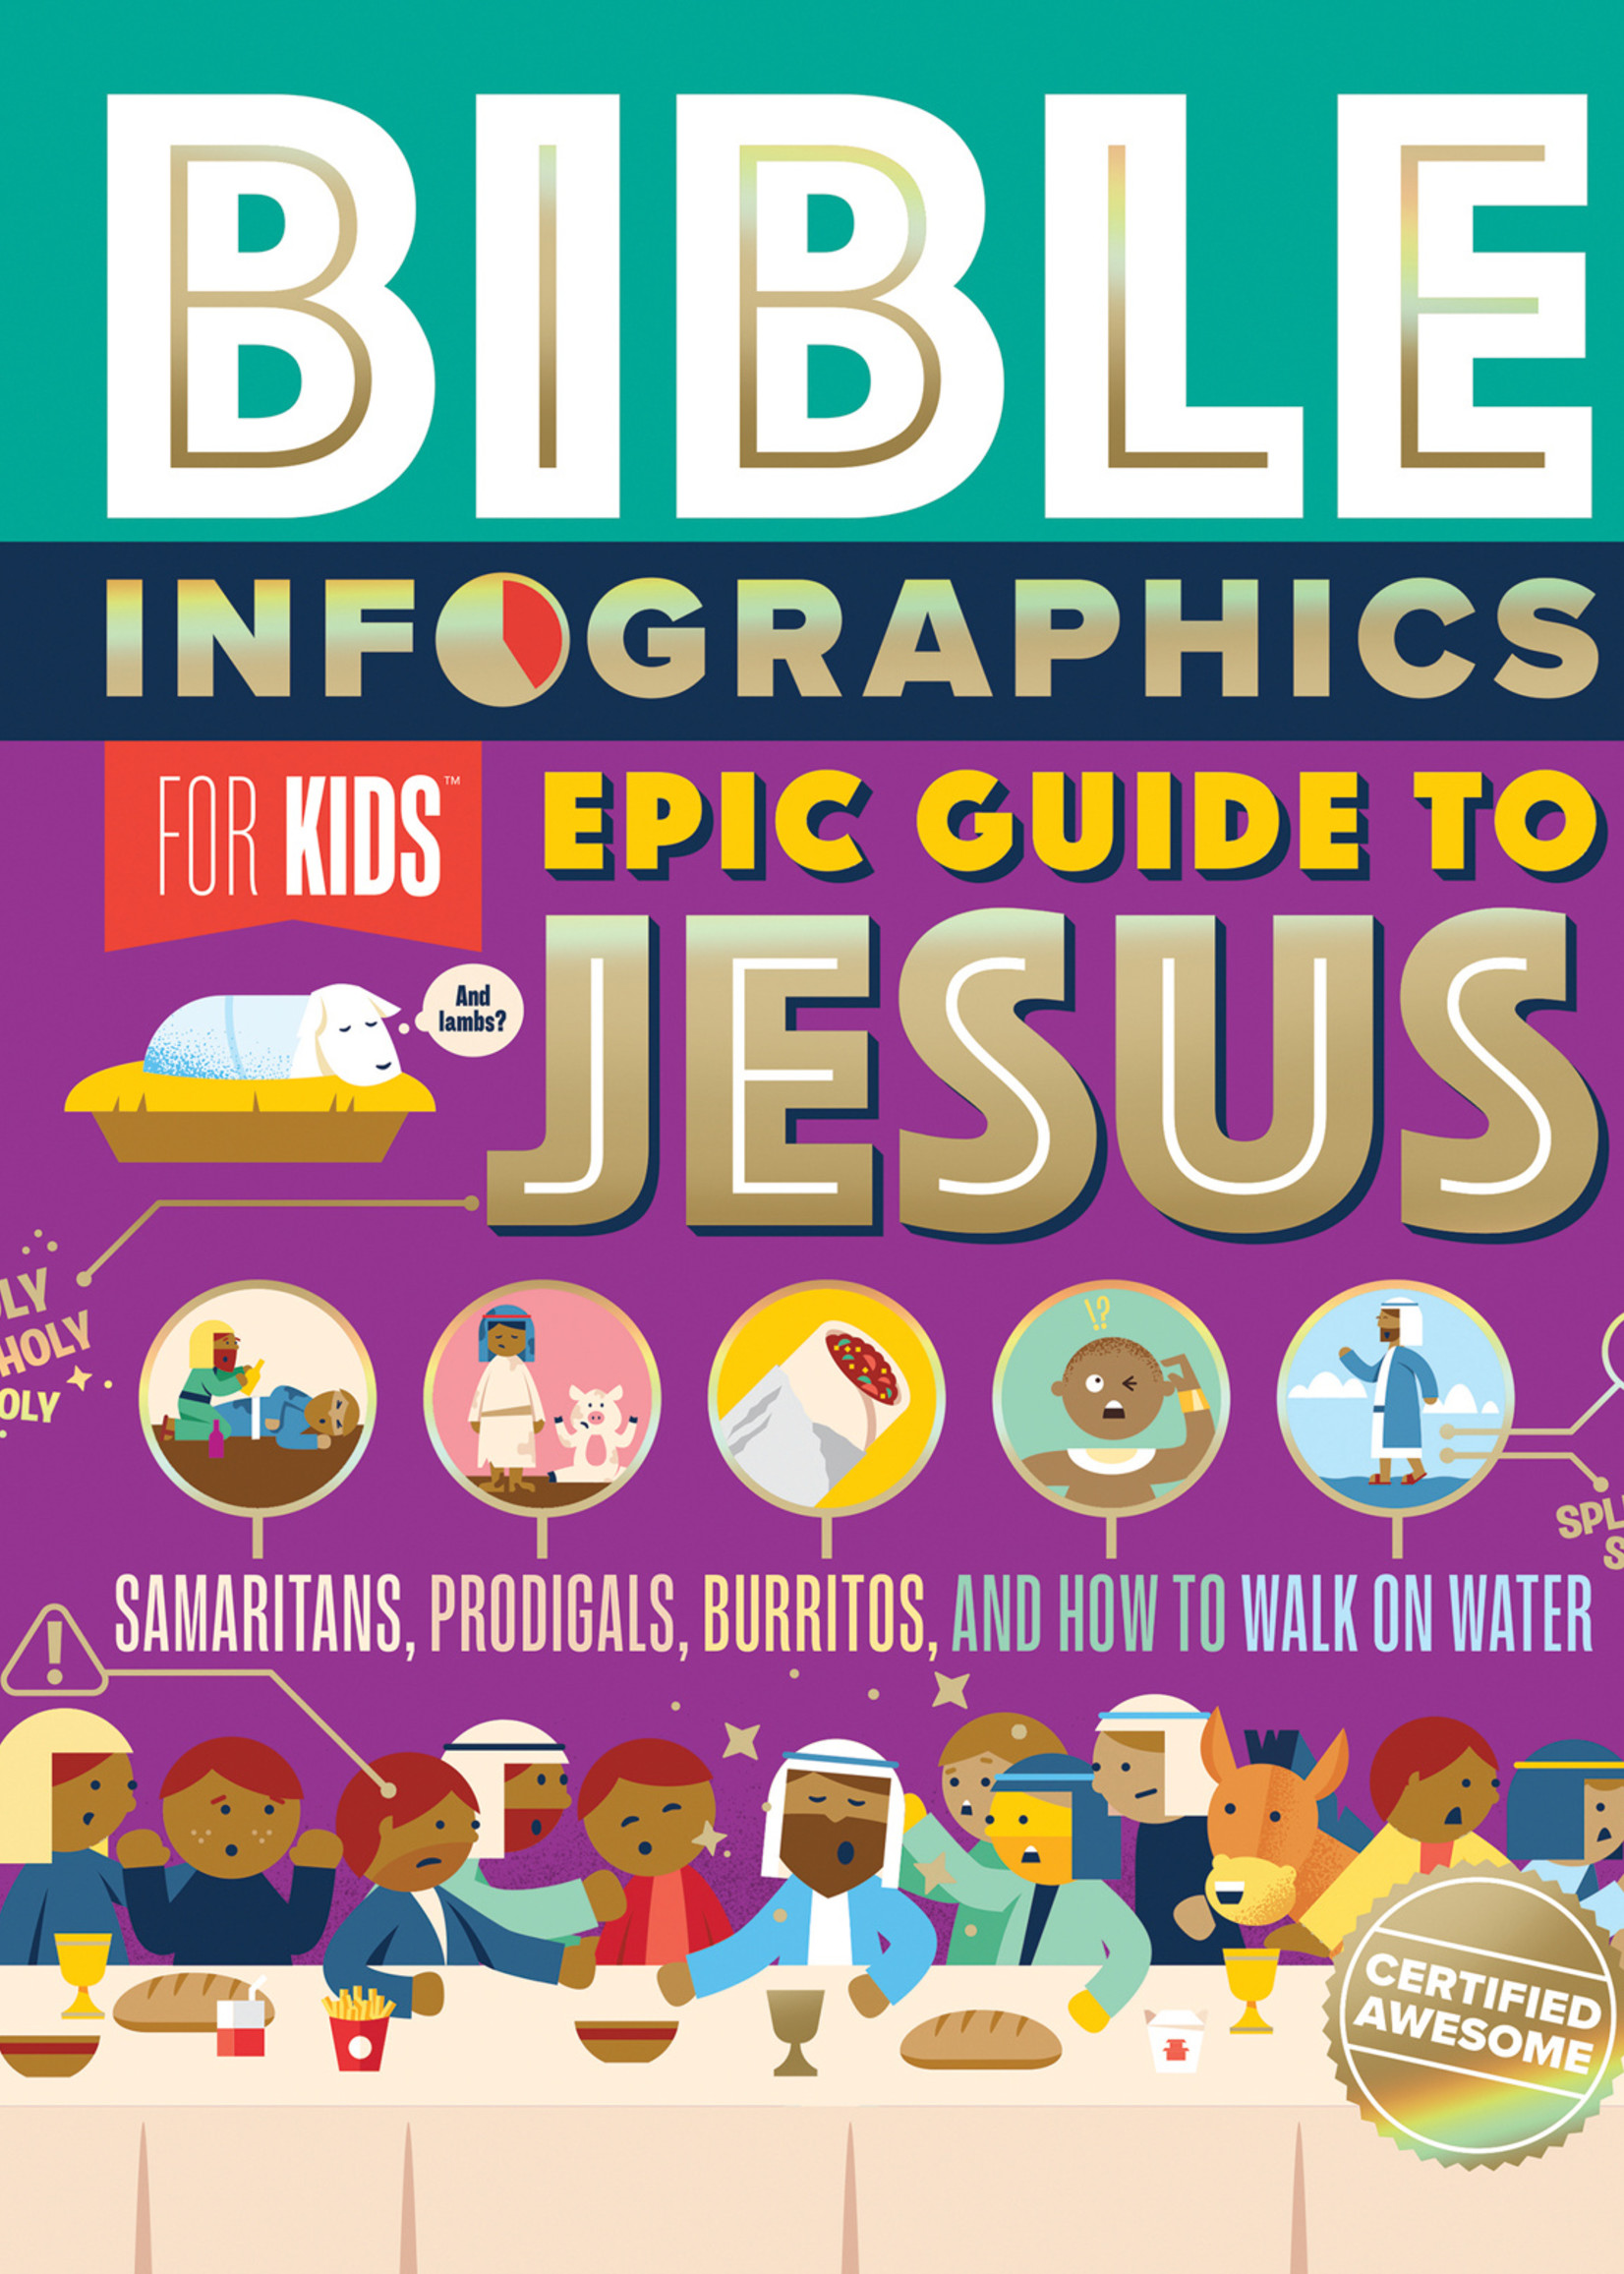 Harvest House Bible Infographics - Epic Guide to Jesus